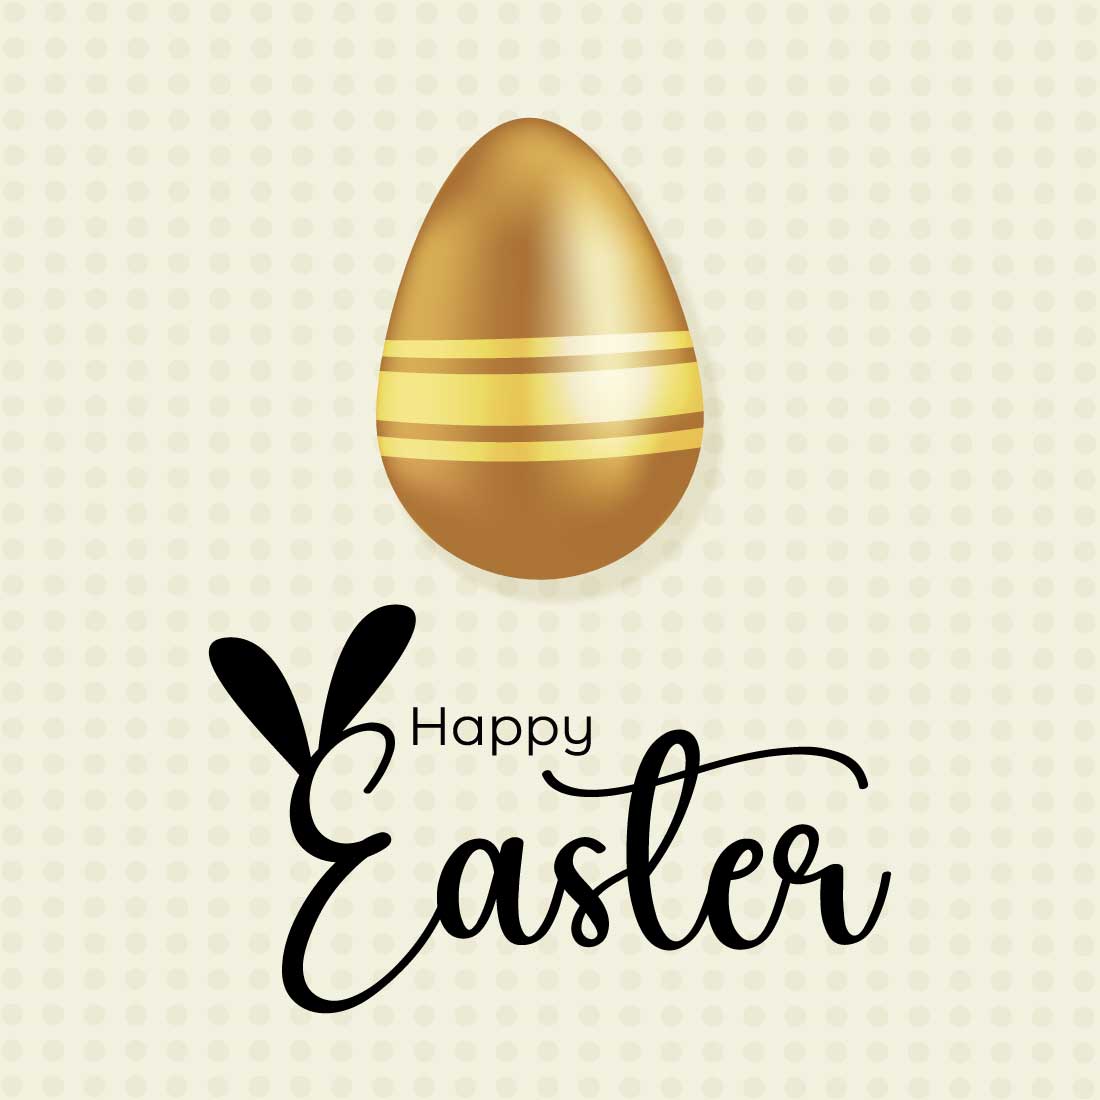 Happy Easter background preview image.